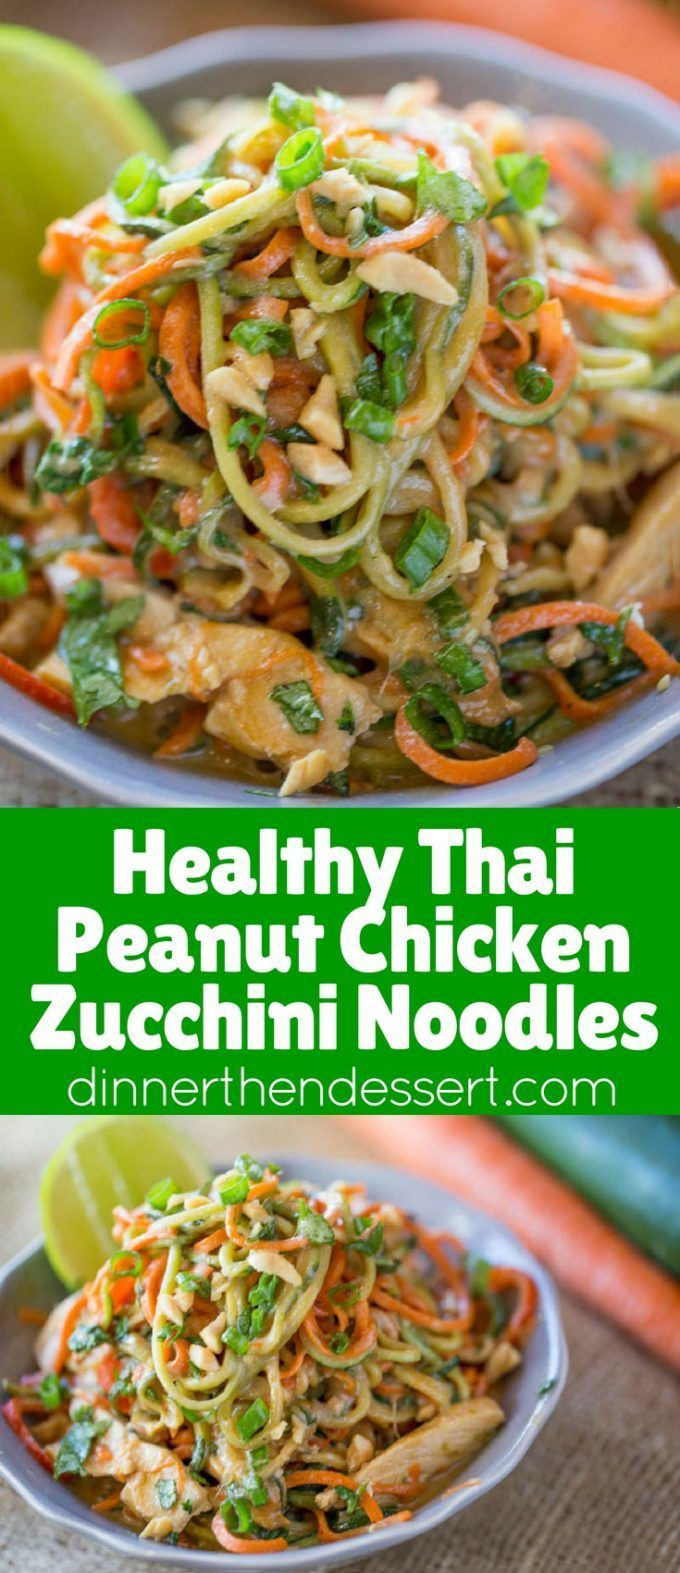 Healthy Thai Chicken Recipes
 1000 ideas about Healthy Eating on Pinterest